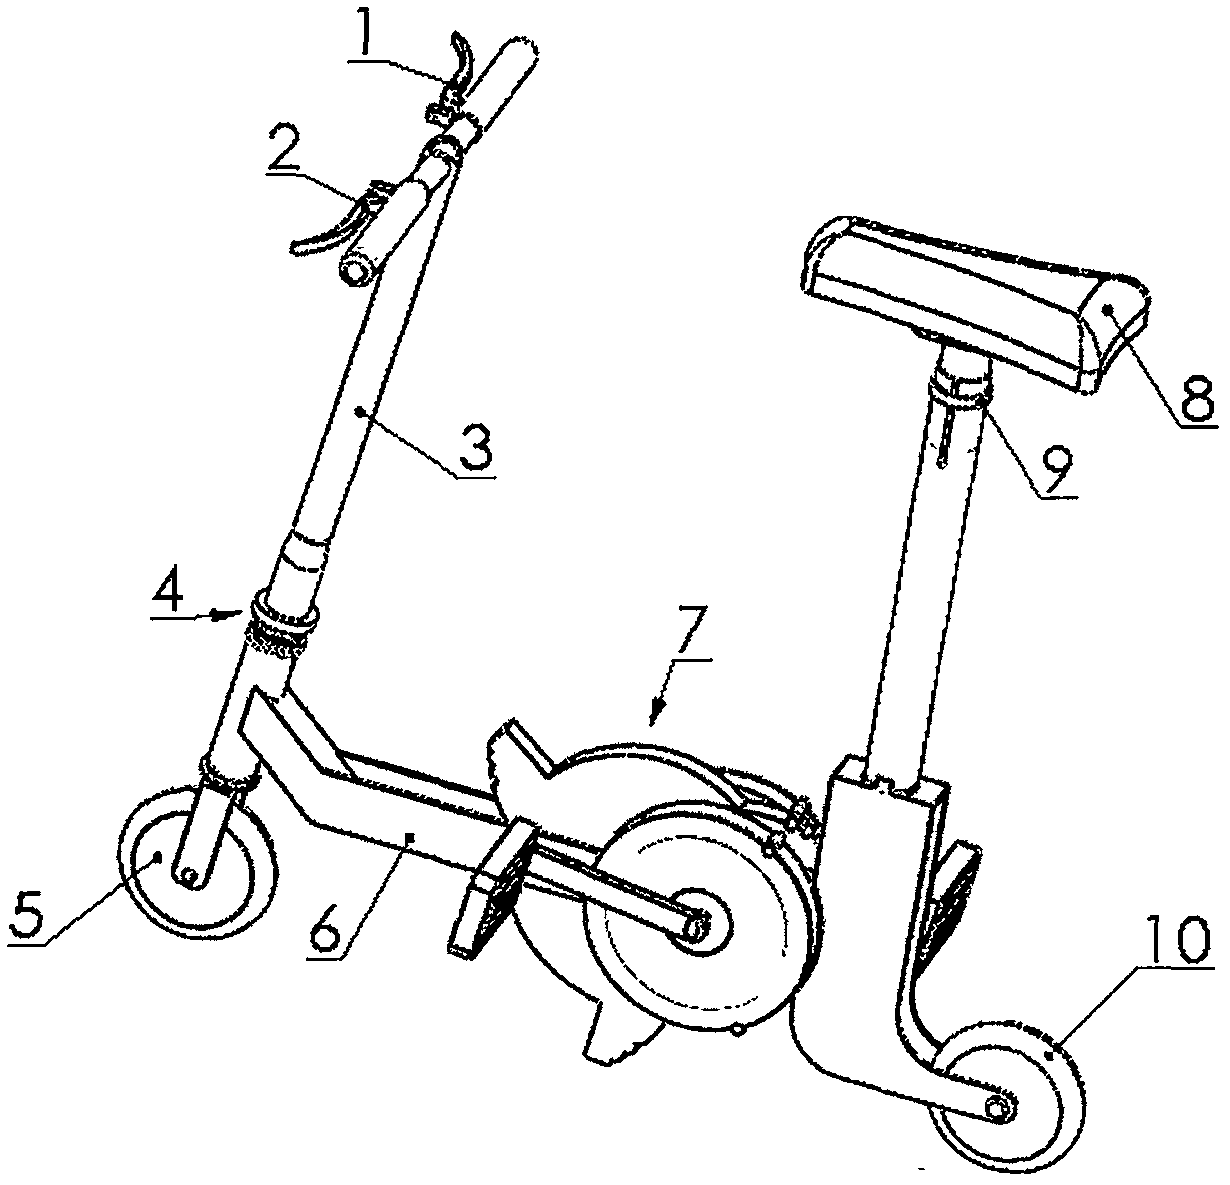 Gear-driven scooter